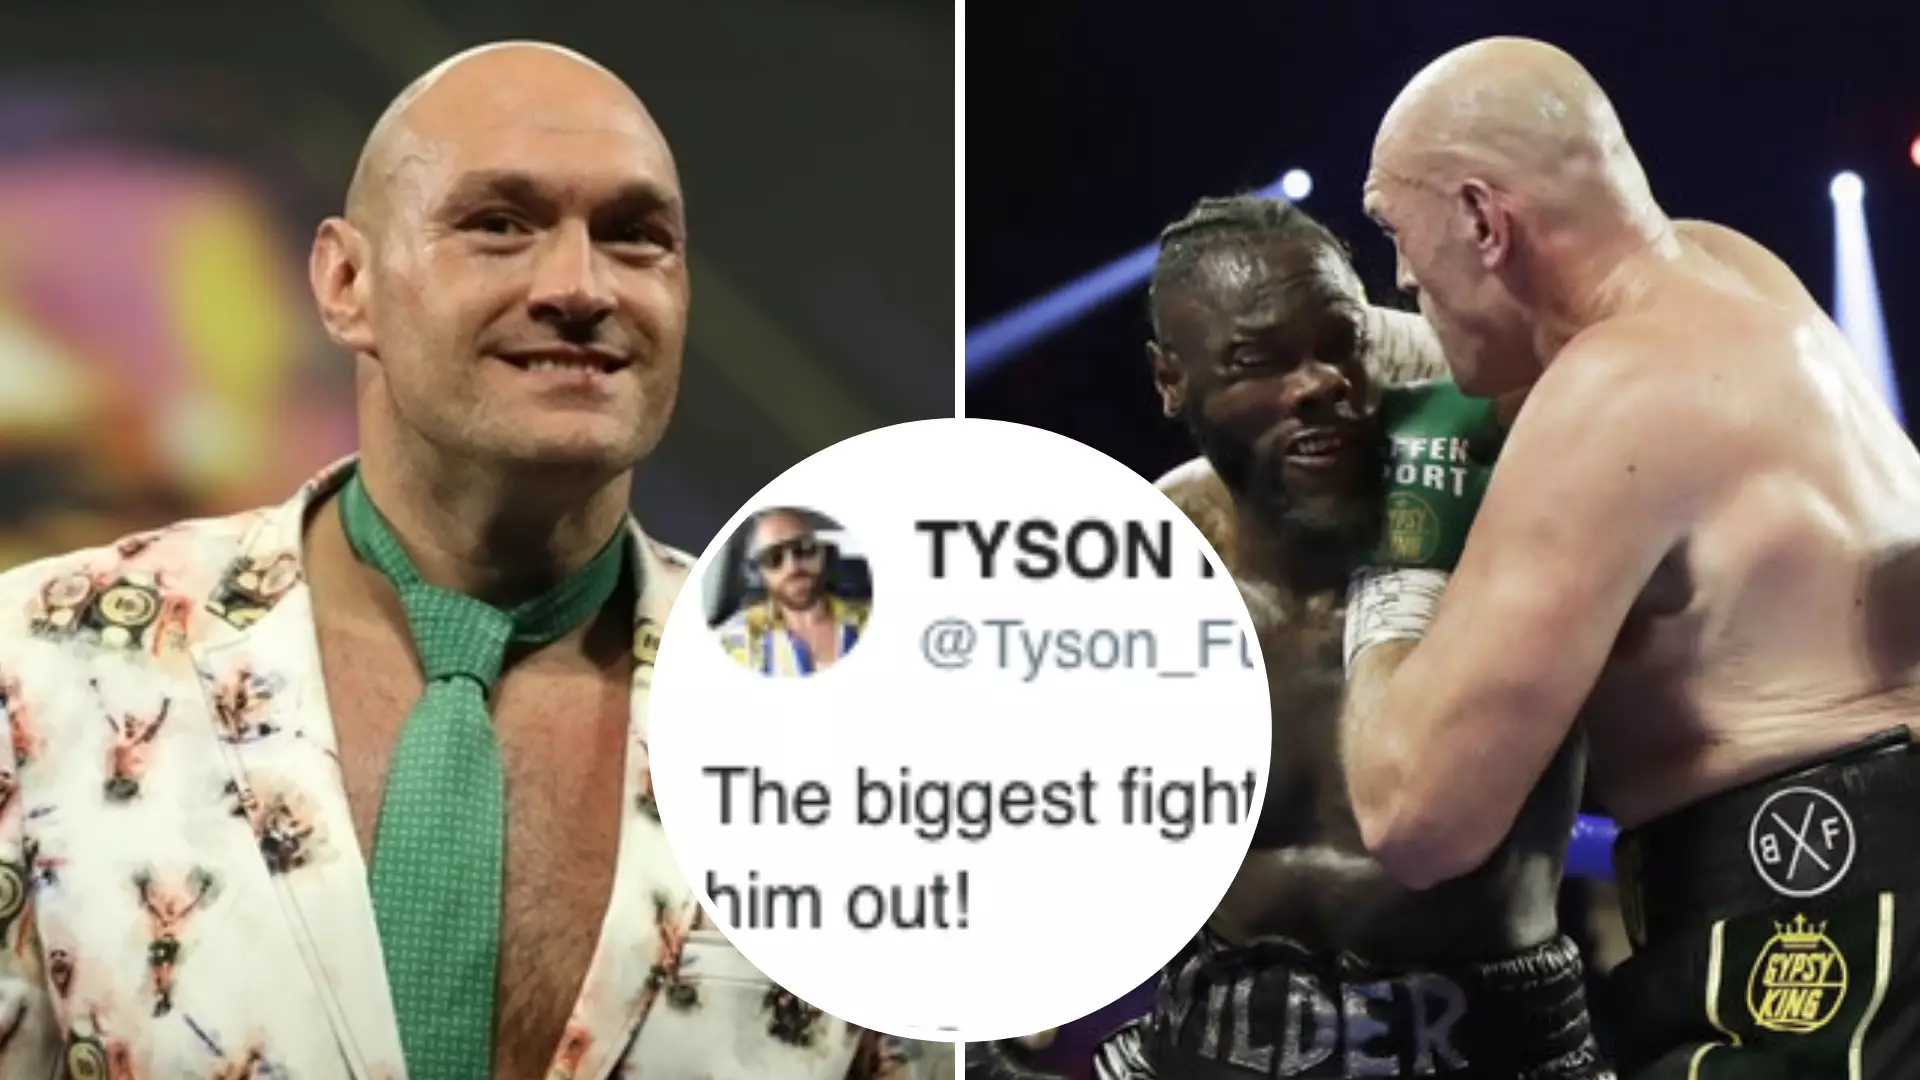 Tyson Fury Eerily Predicted His Path To Top Of The Boxing World In 2013 Tweet